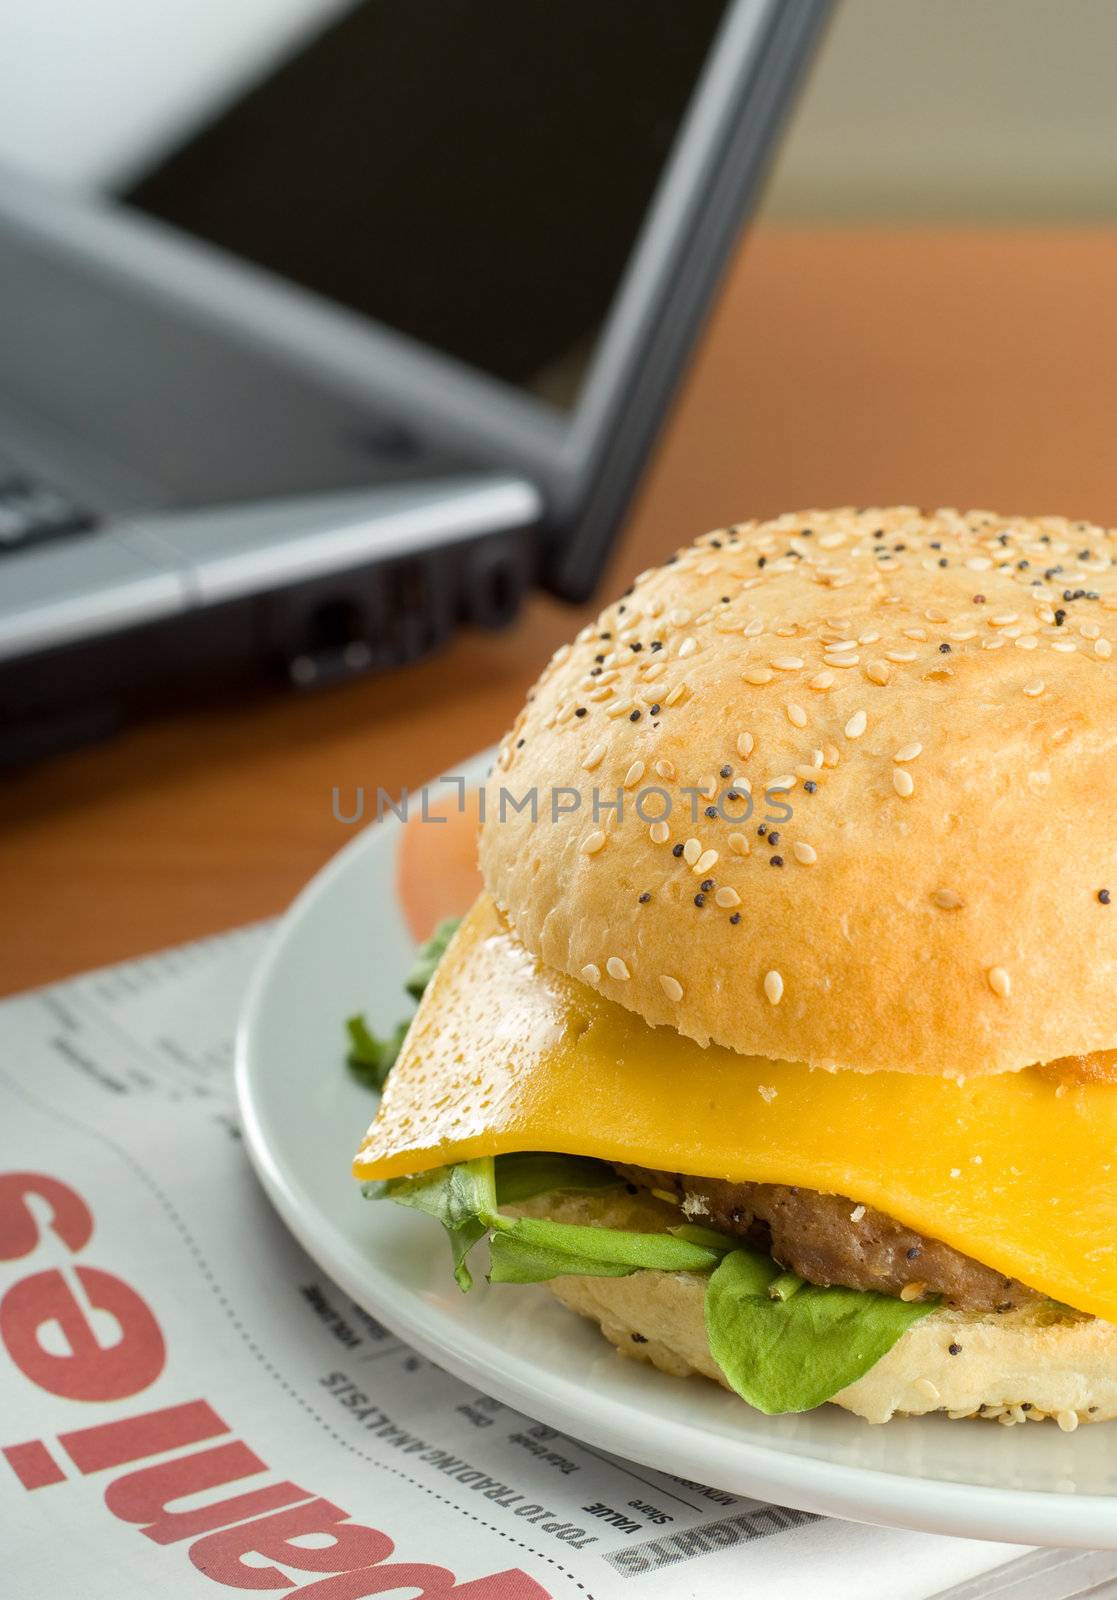 Office business lunch food cheese hamburger, laptop and financial newspaper on office desk